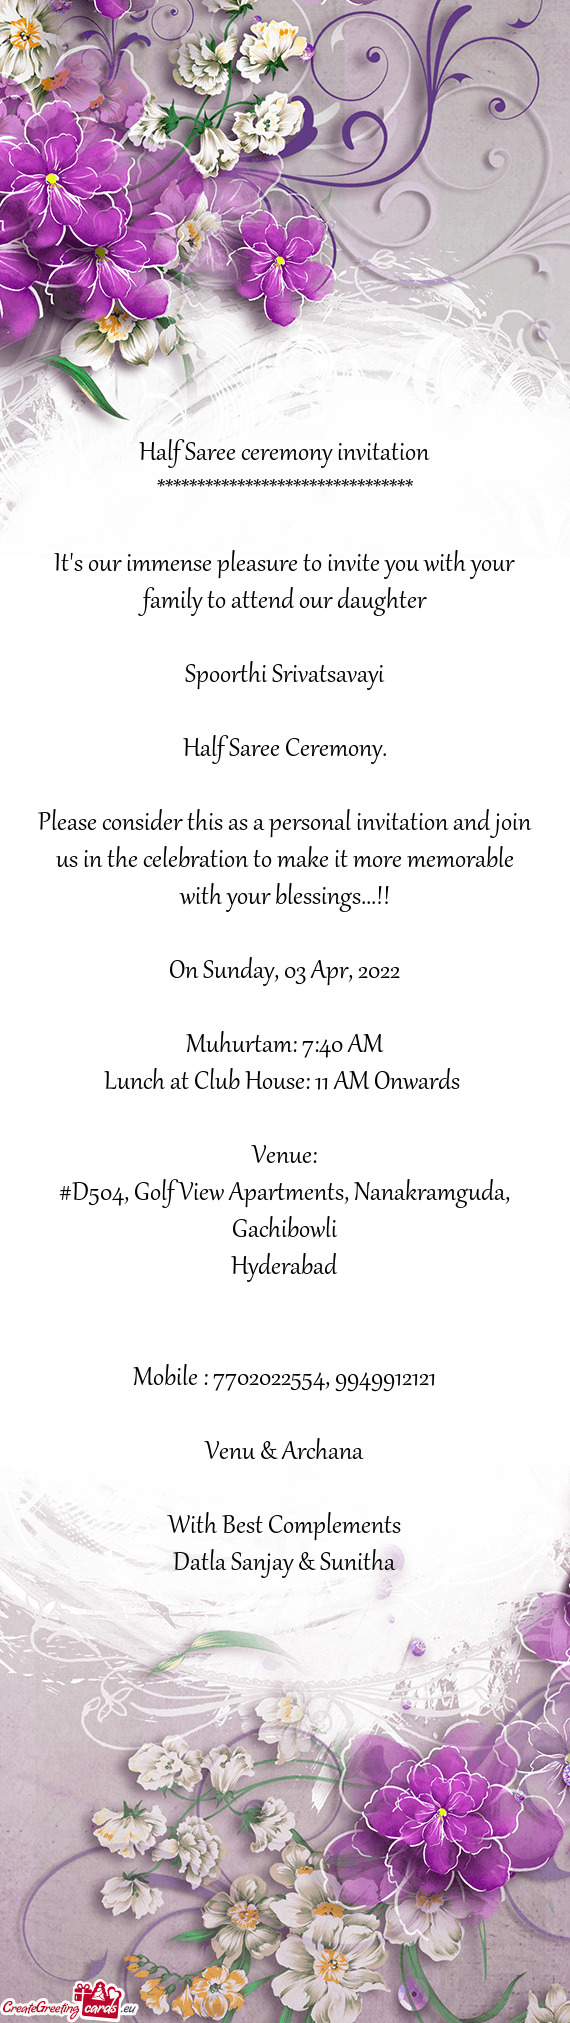 Please consider this as a personal invitation and join us in the celebration to make it more memorab